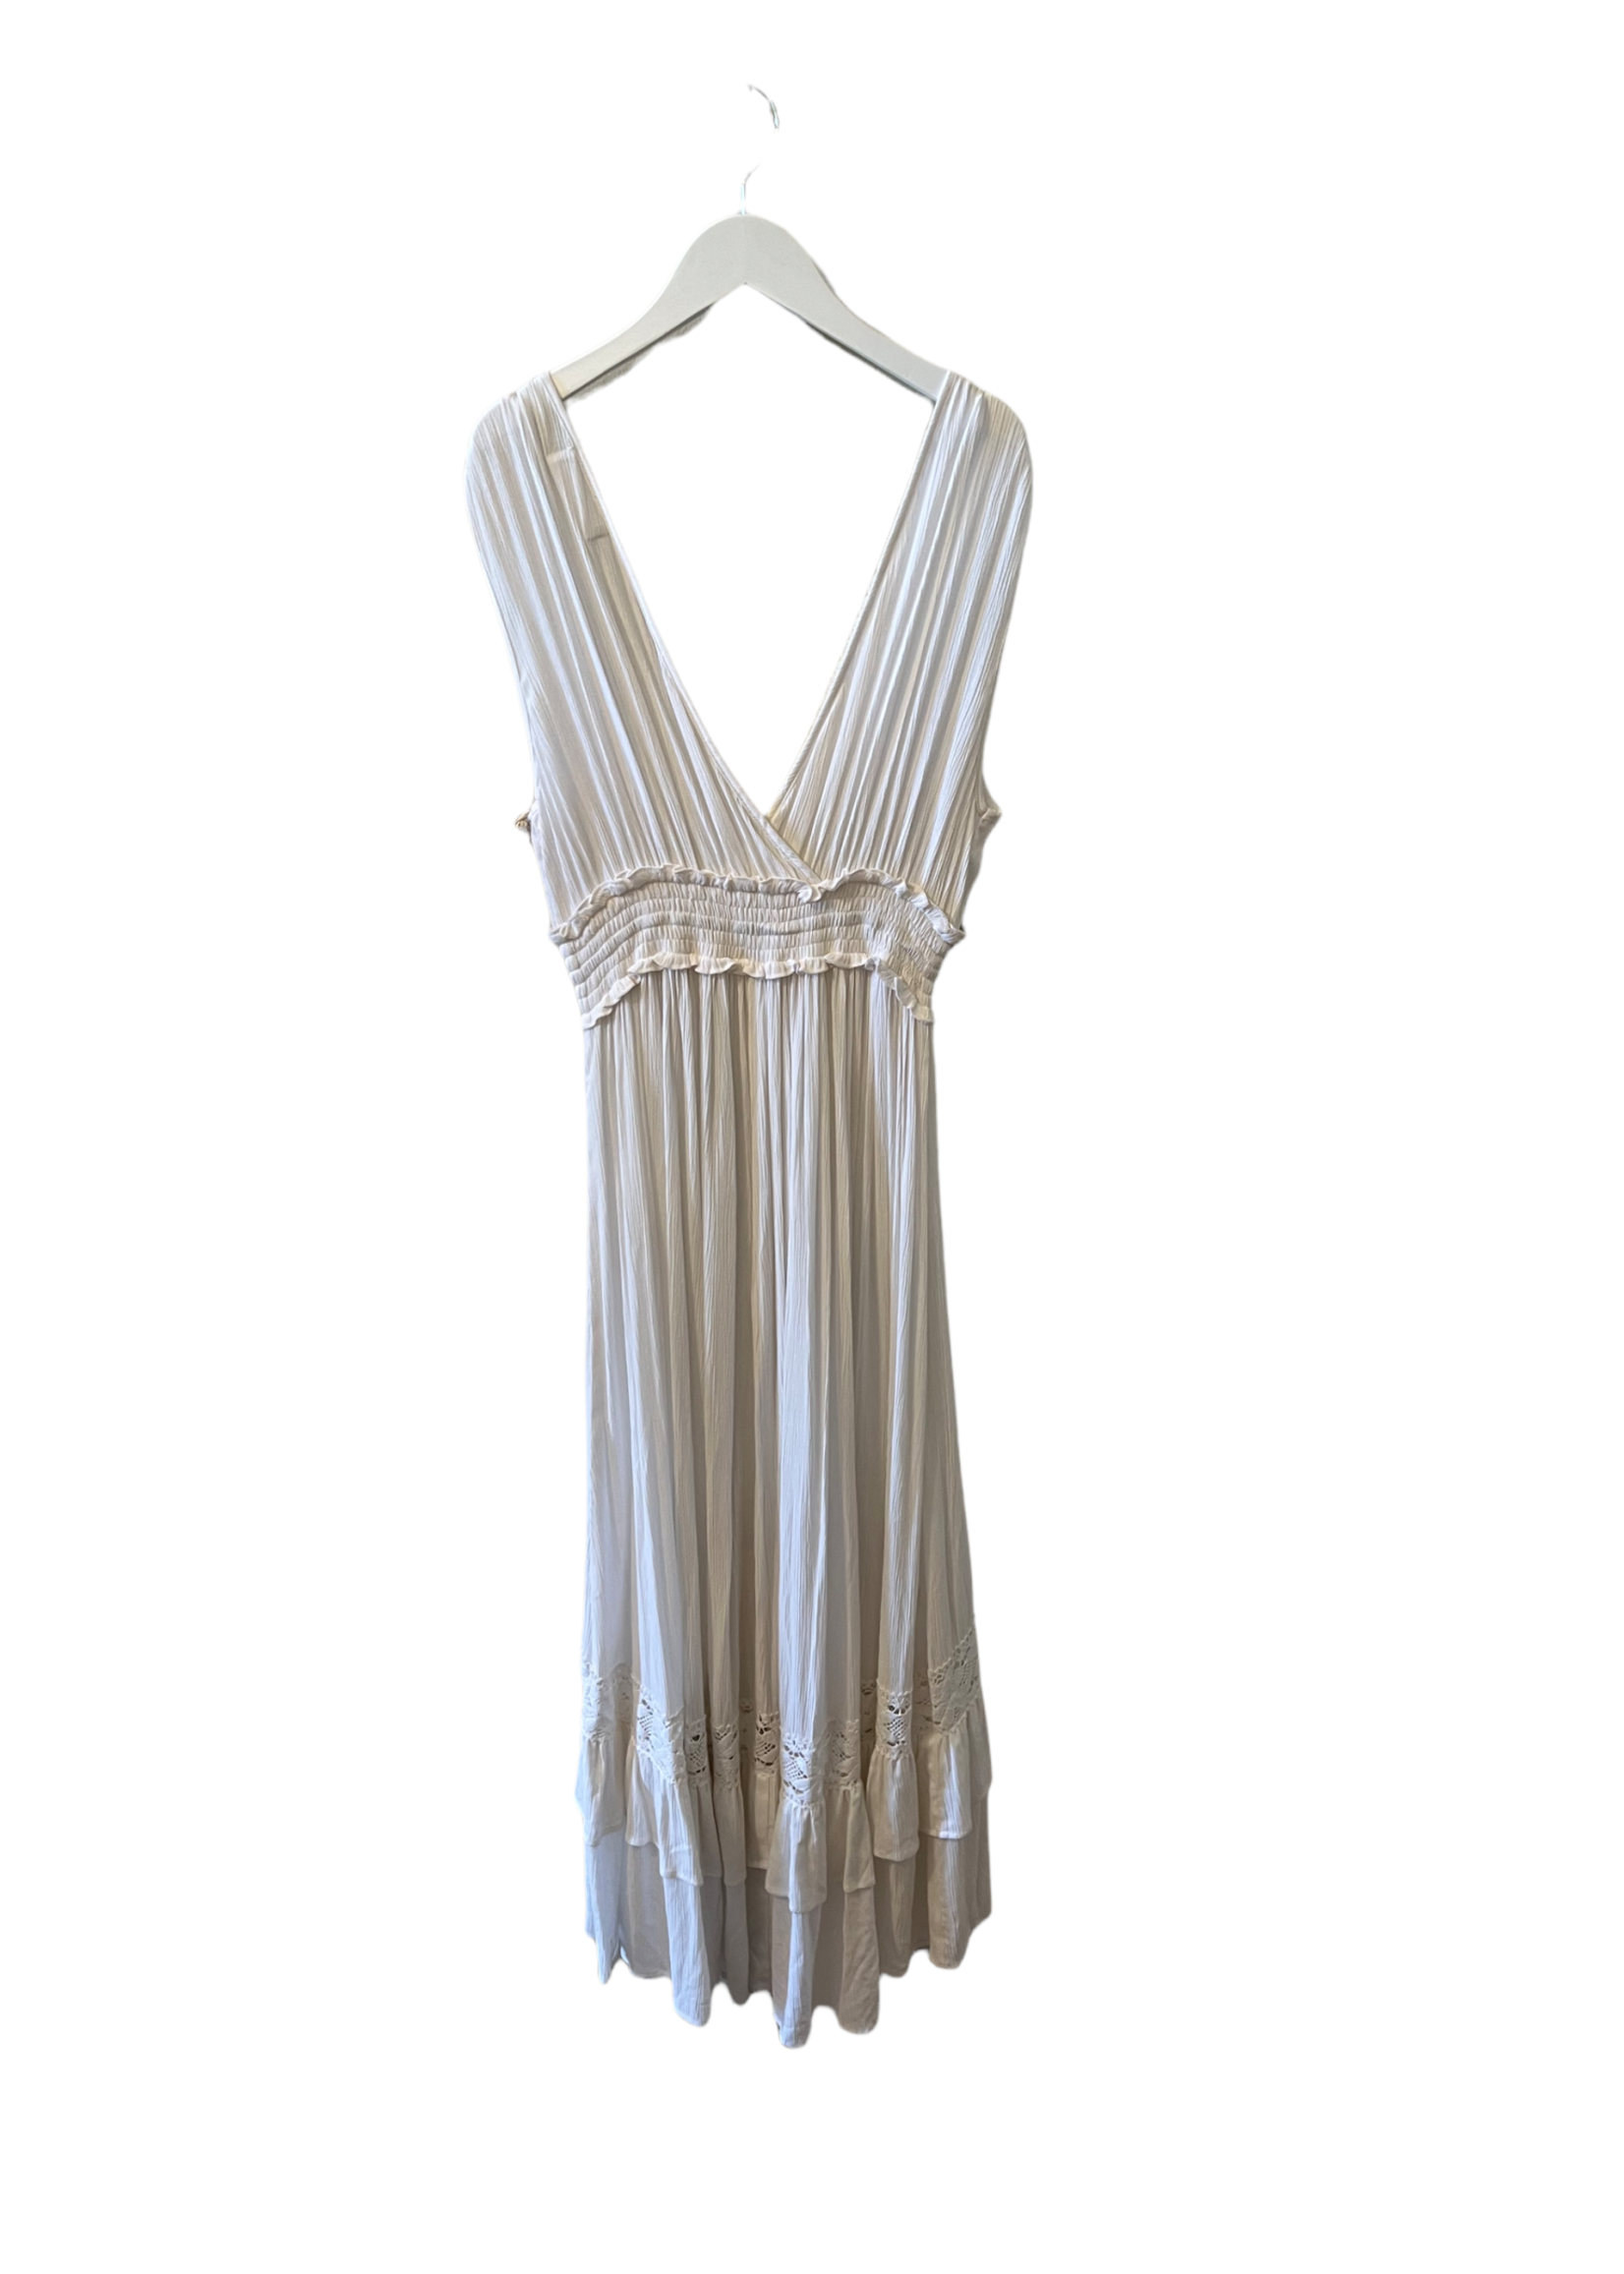 BAND OF GYPSIES FLAWLESS DRESS IN IVORY- SIZE M